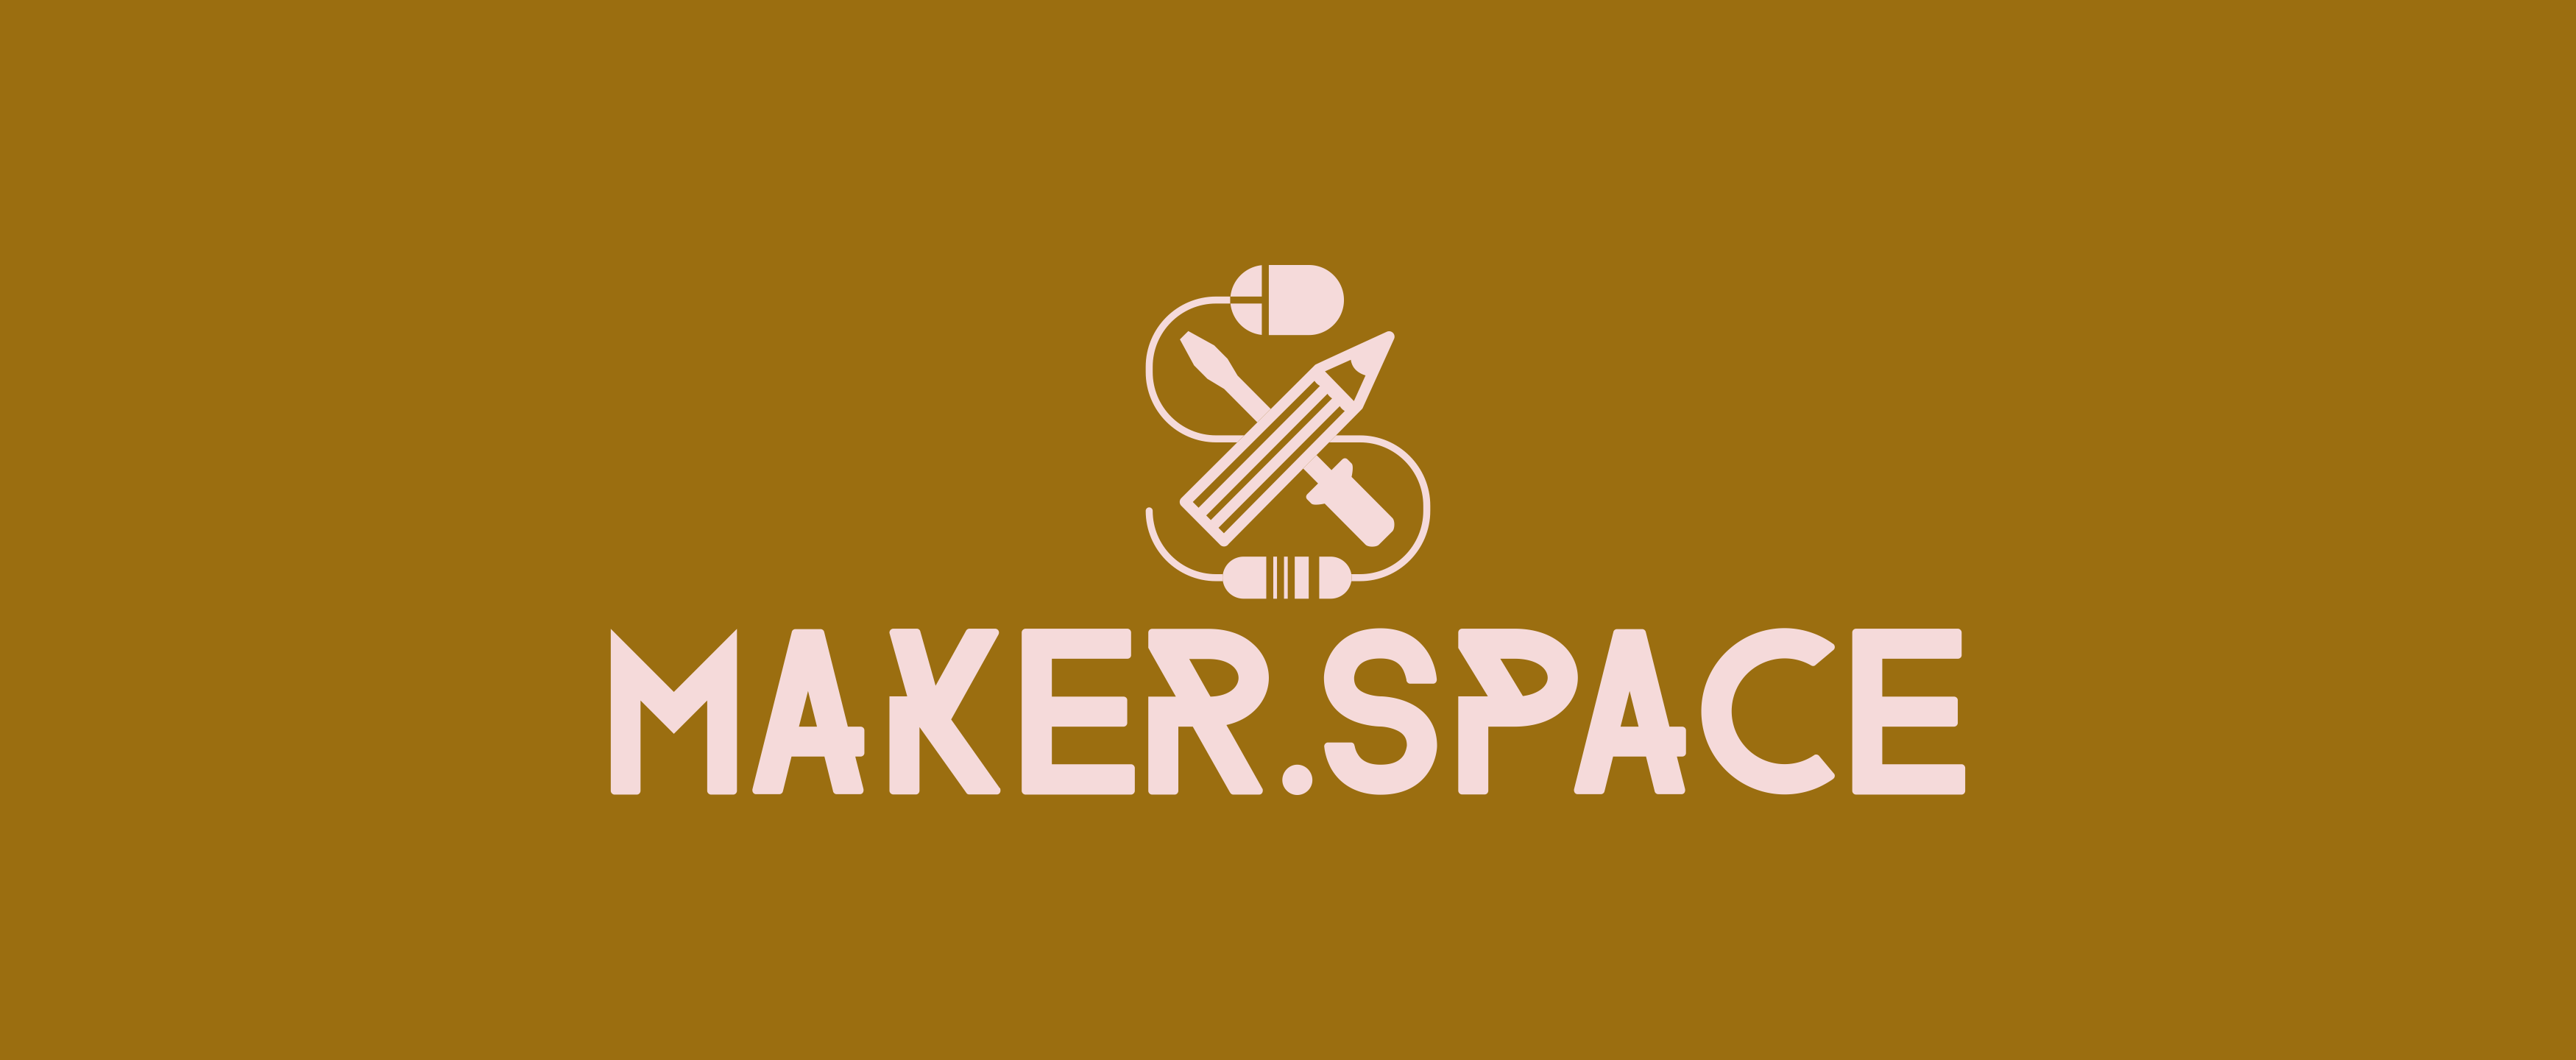 Maker.Space